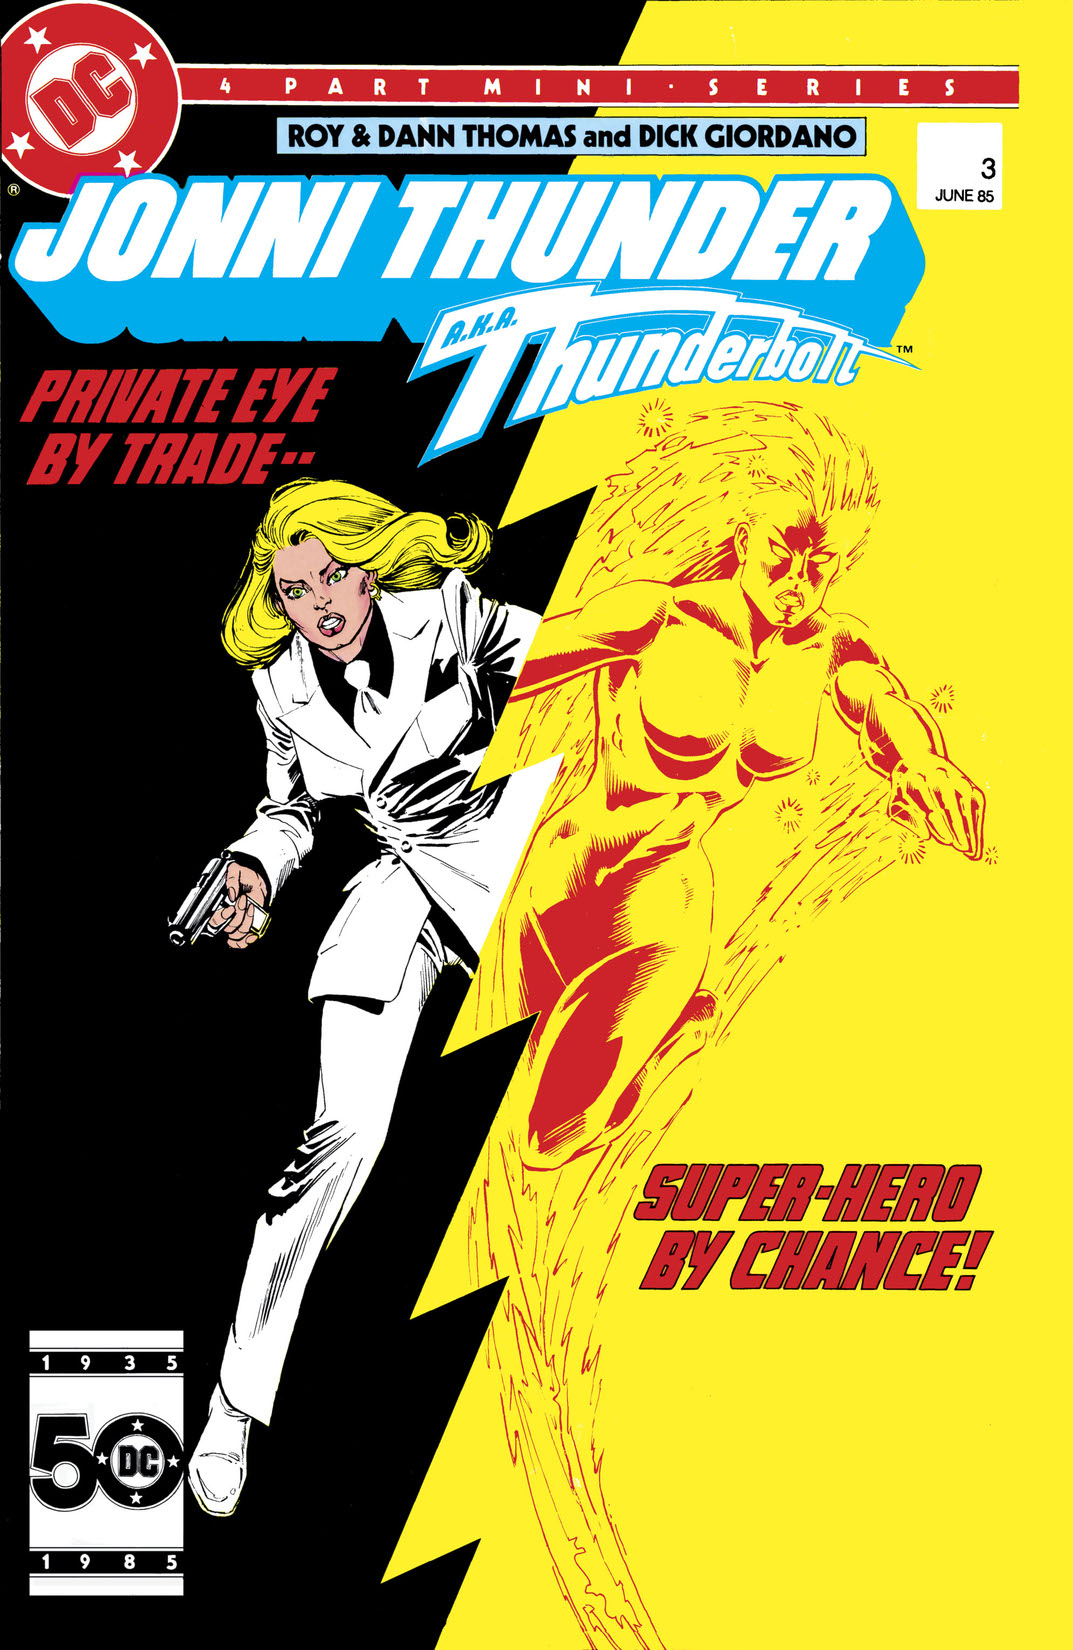 Jonni Thunder #3 preview images